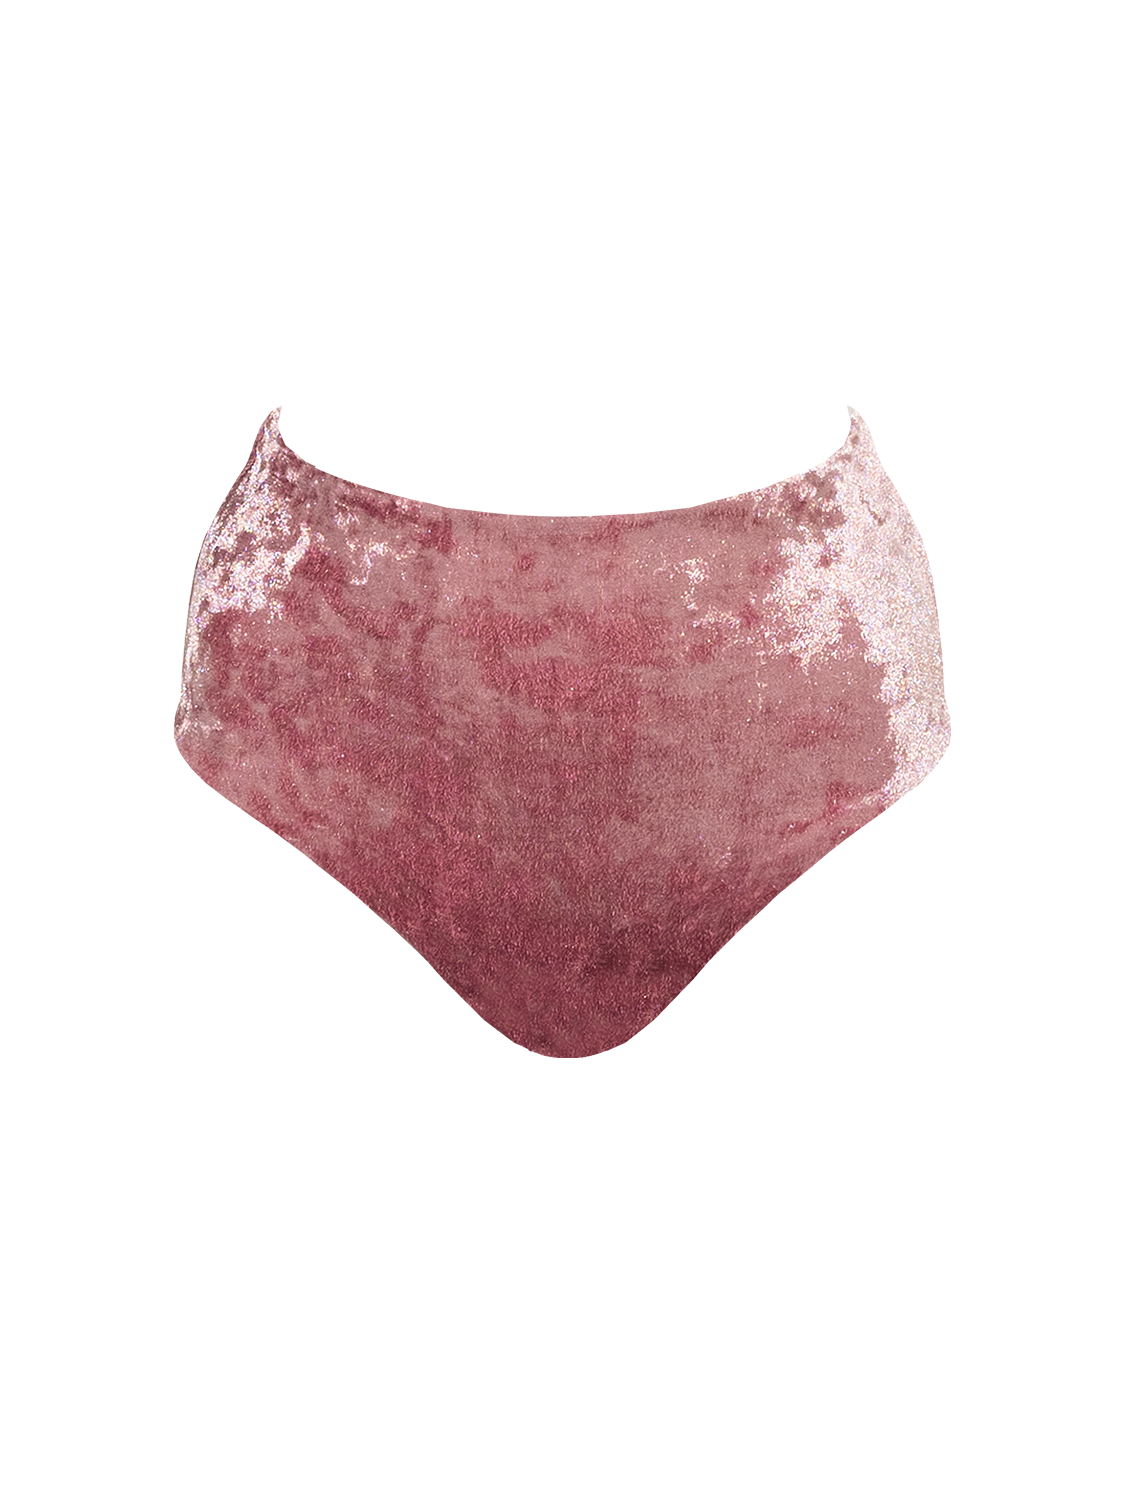 Coral Mirage ~ Classic High-Waisted Bottom - Velvet Pink